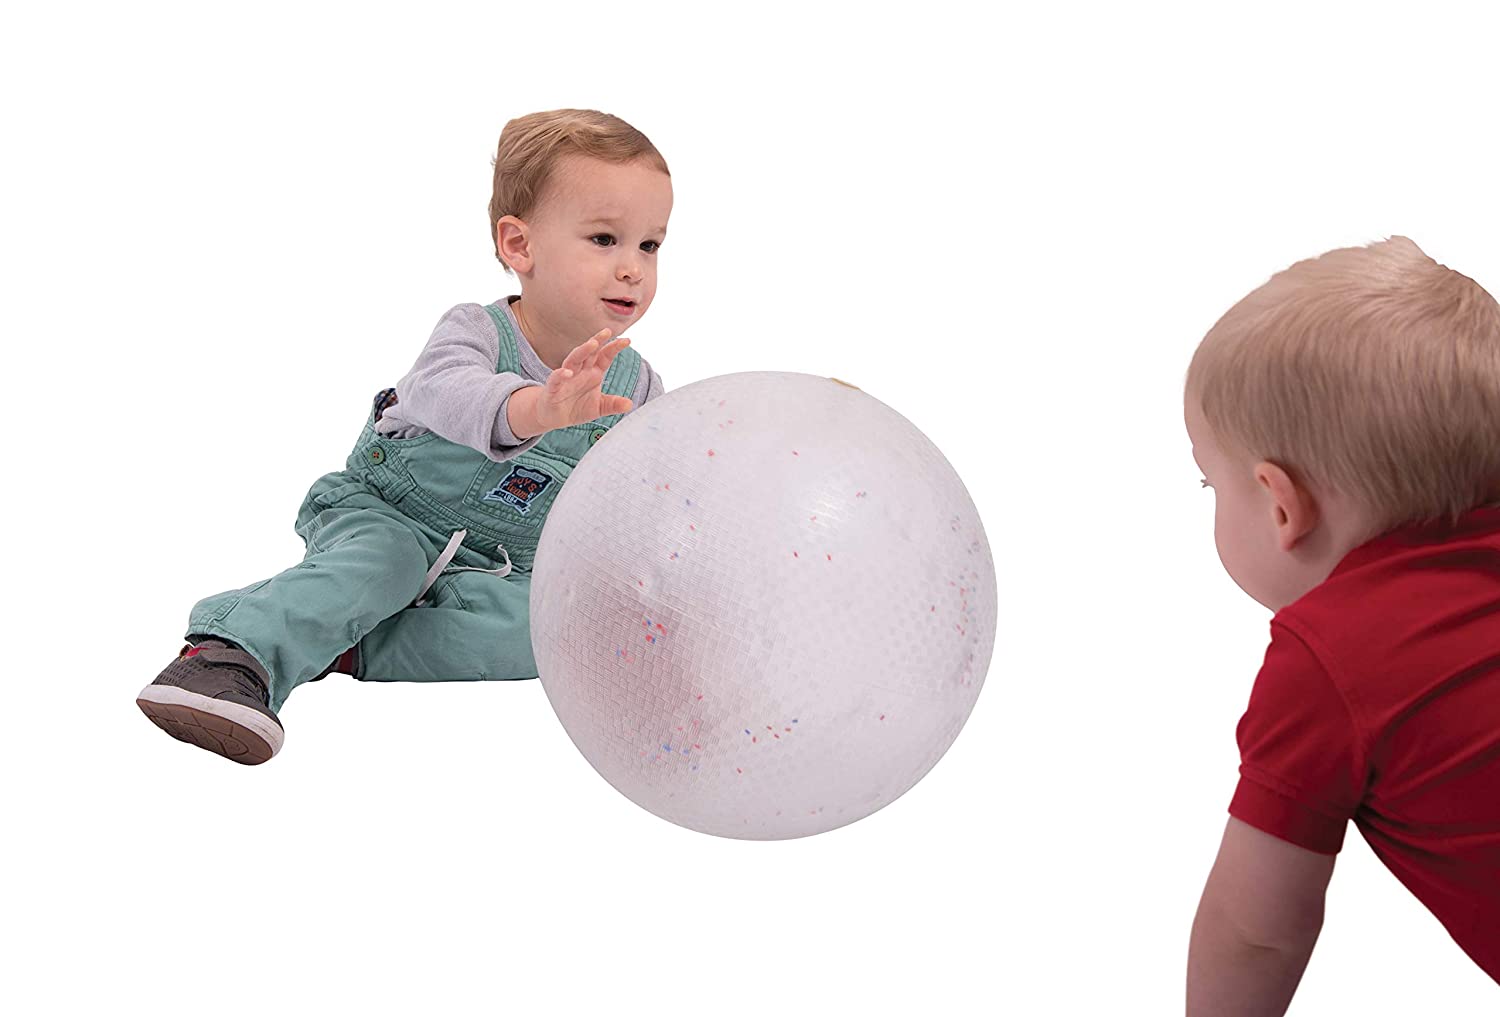 TickiT - 75045 Constellation Ball - Learn to Throw &amp; Catch - Tactile Learning Balls - Sensory Ball